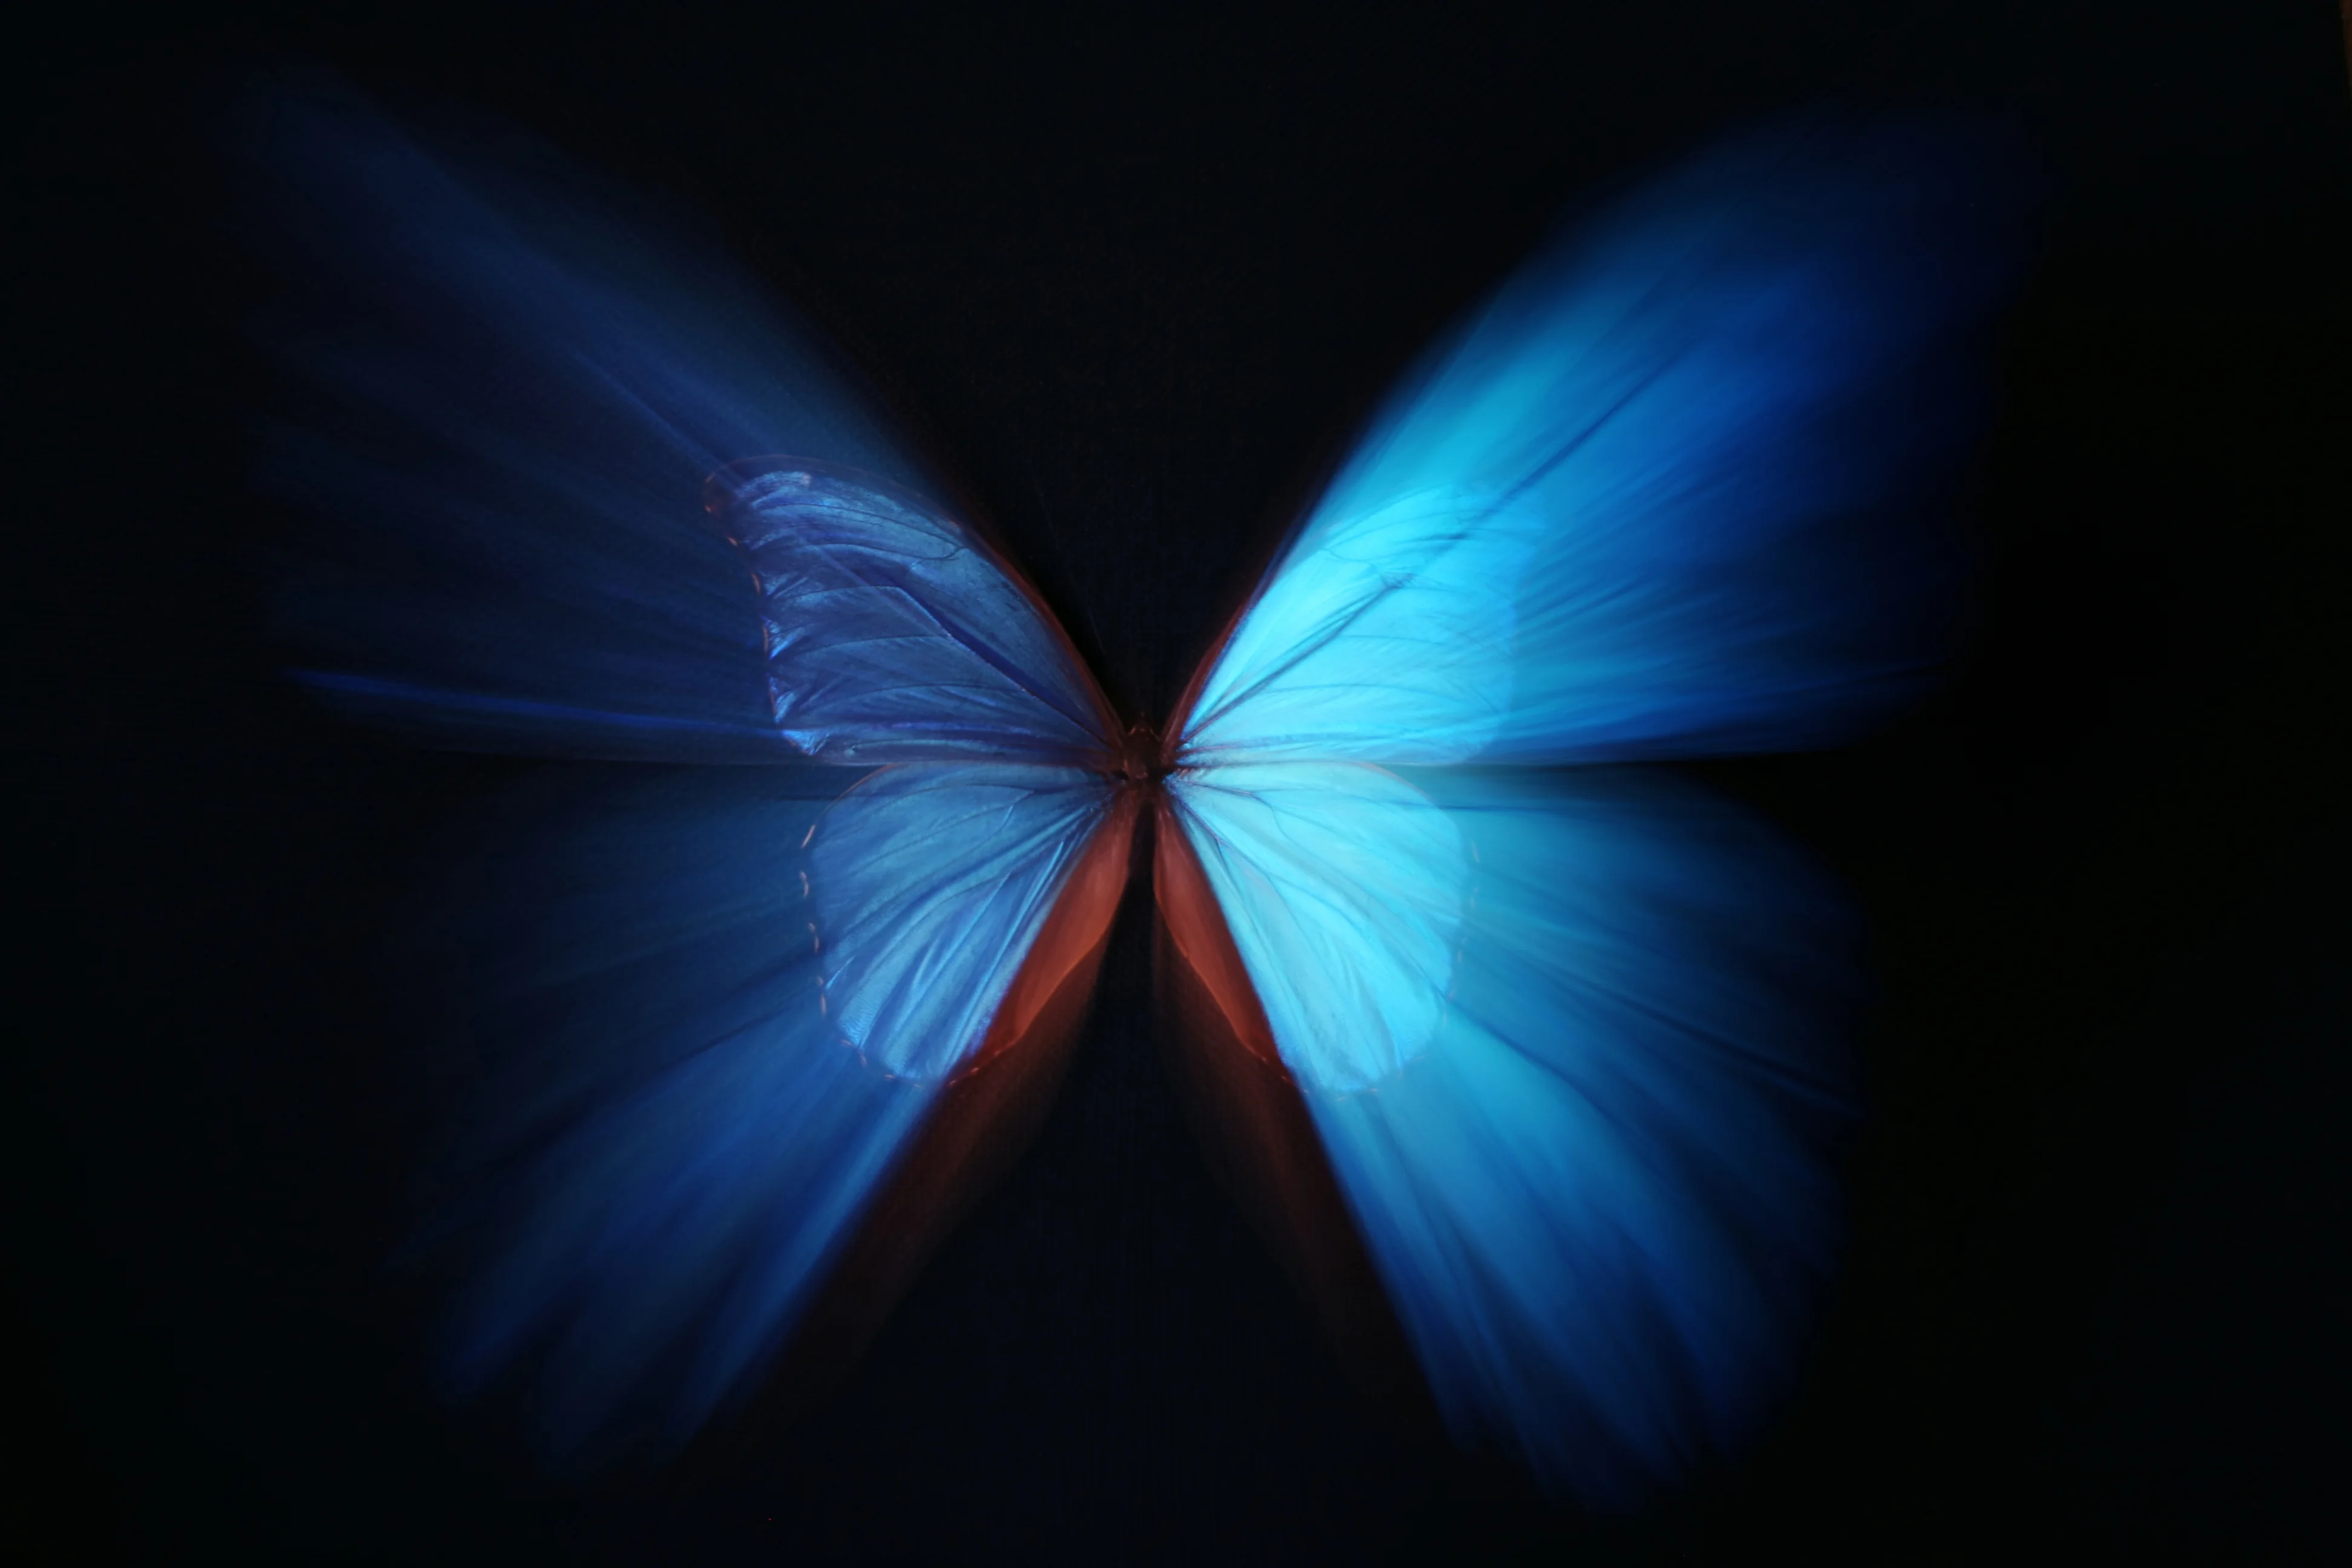 Is The ‘Butterfly Effect’ A Real Thing?